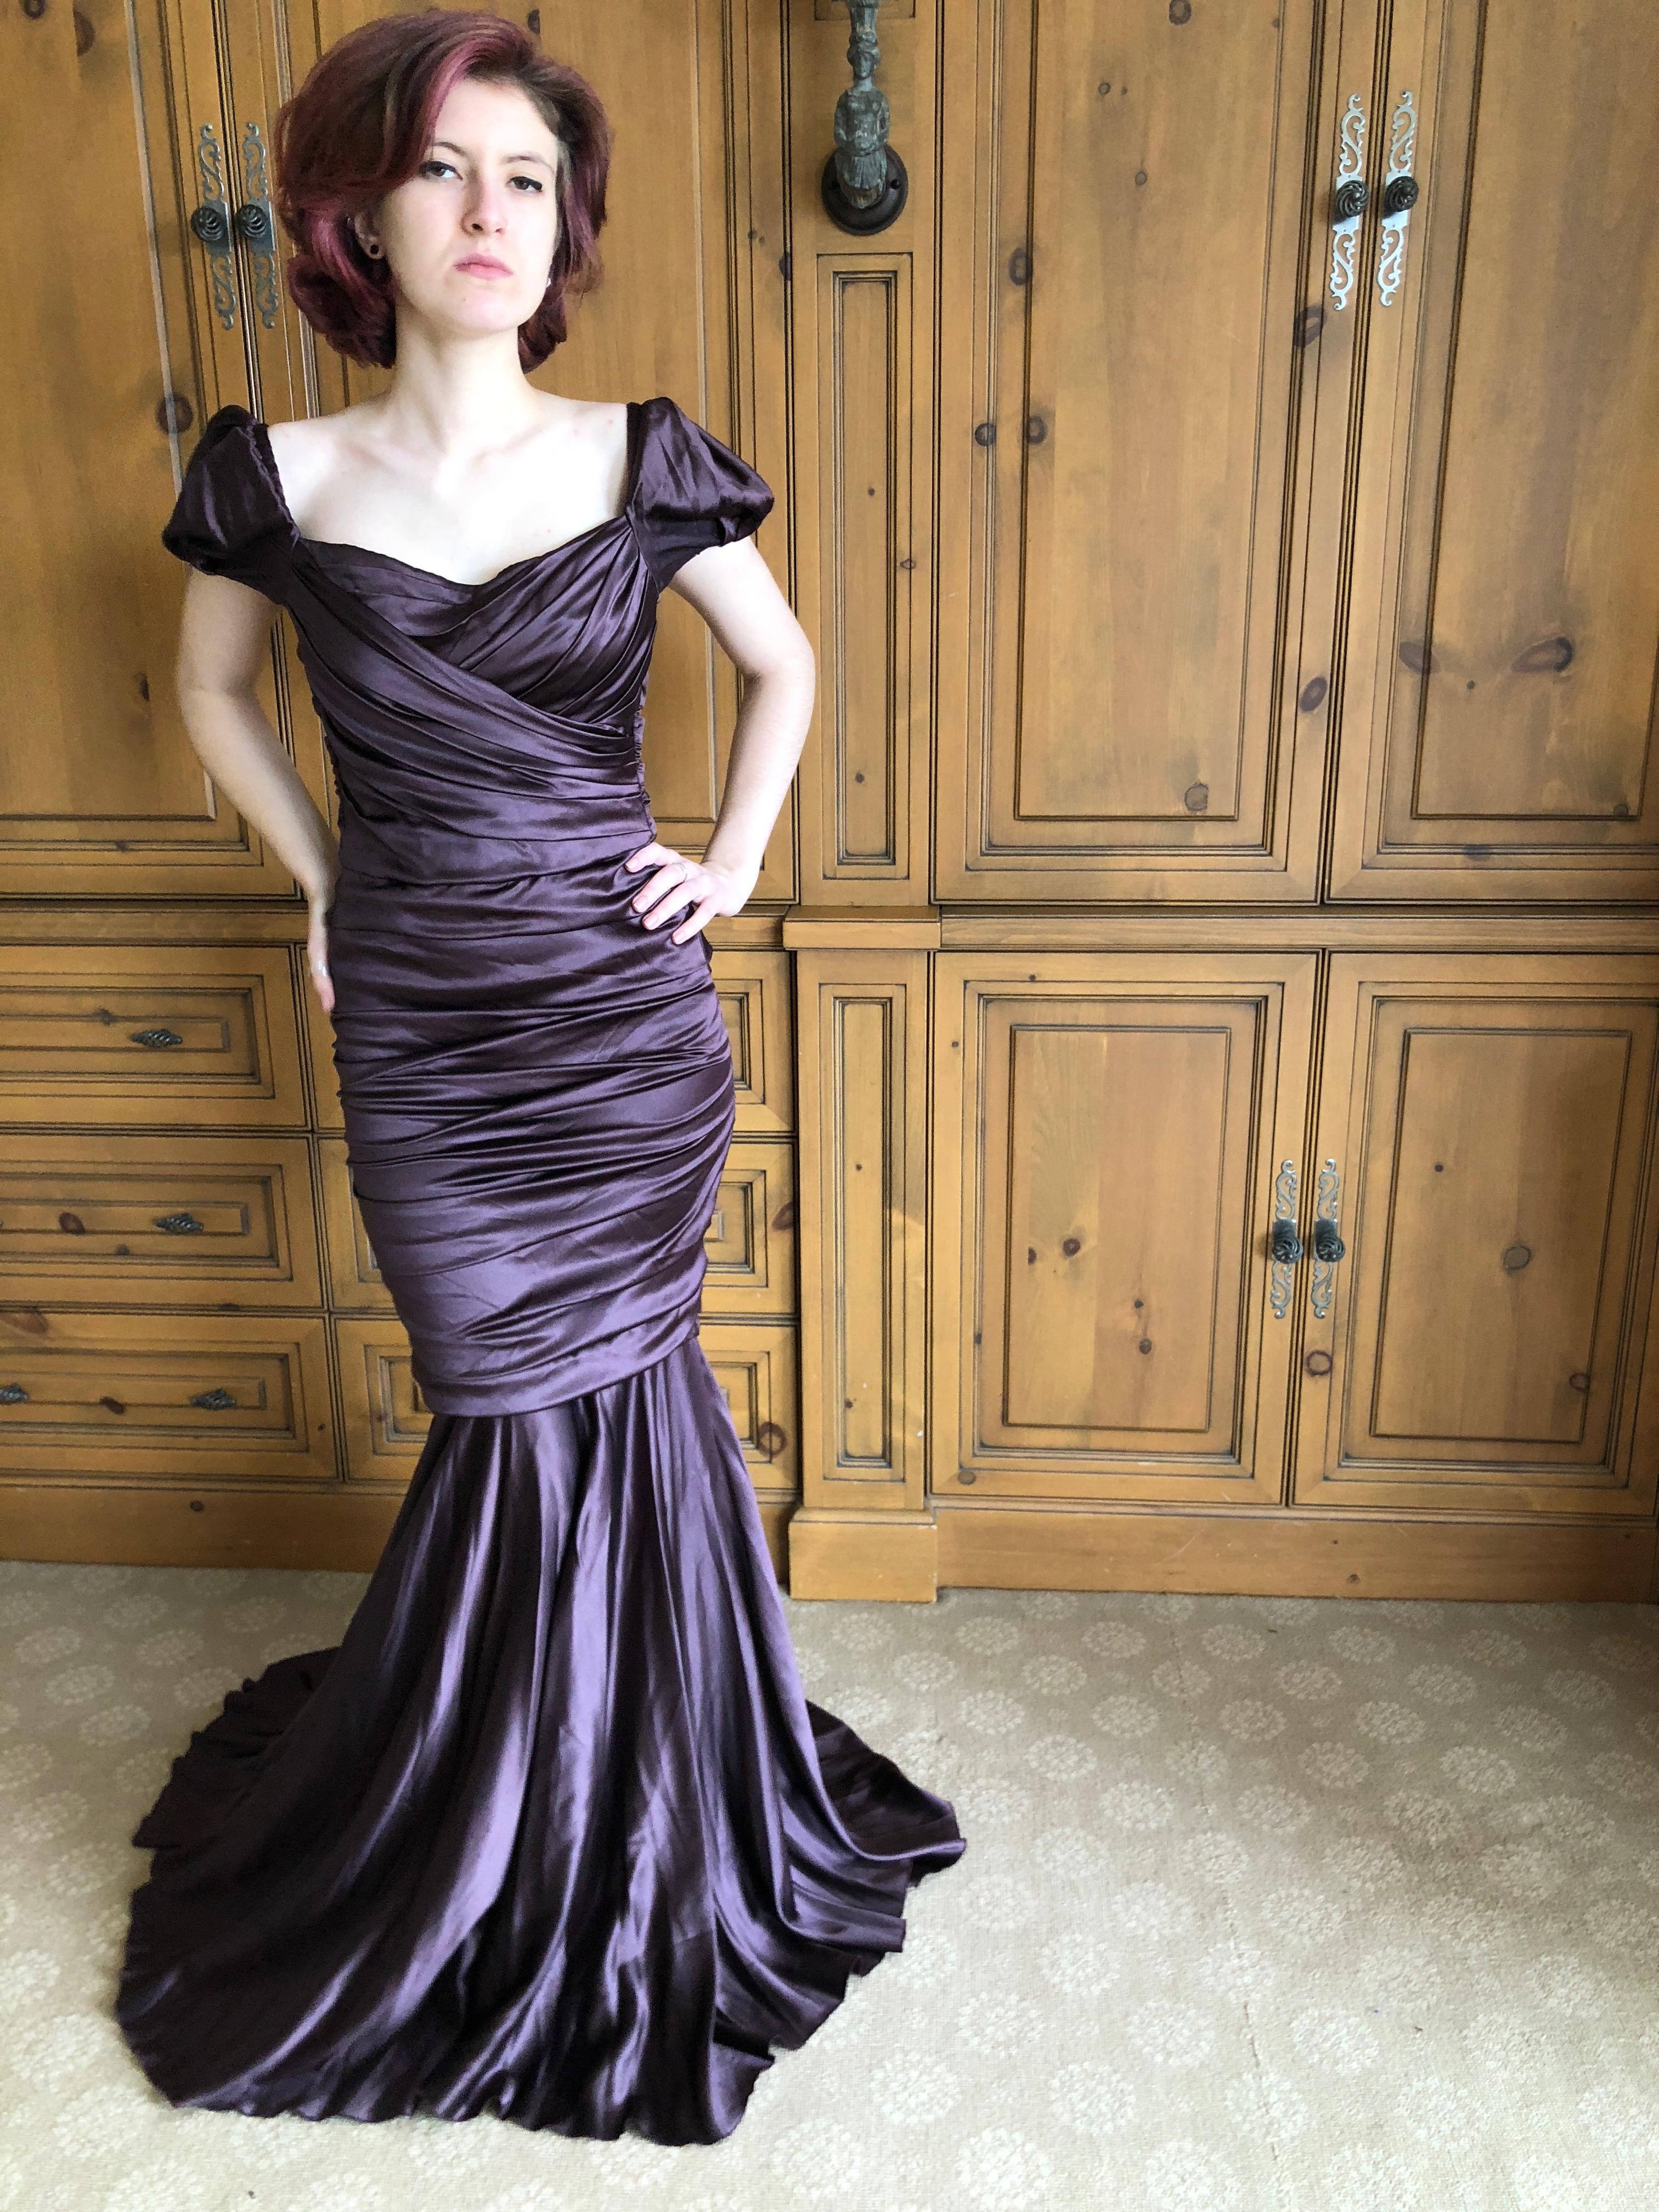 Dolce & Gabbana Vintage Purple Ruched Evening Dress.
Silk with a built in corset

Size 42
Bust 36